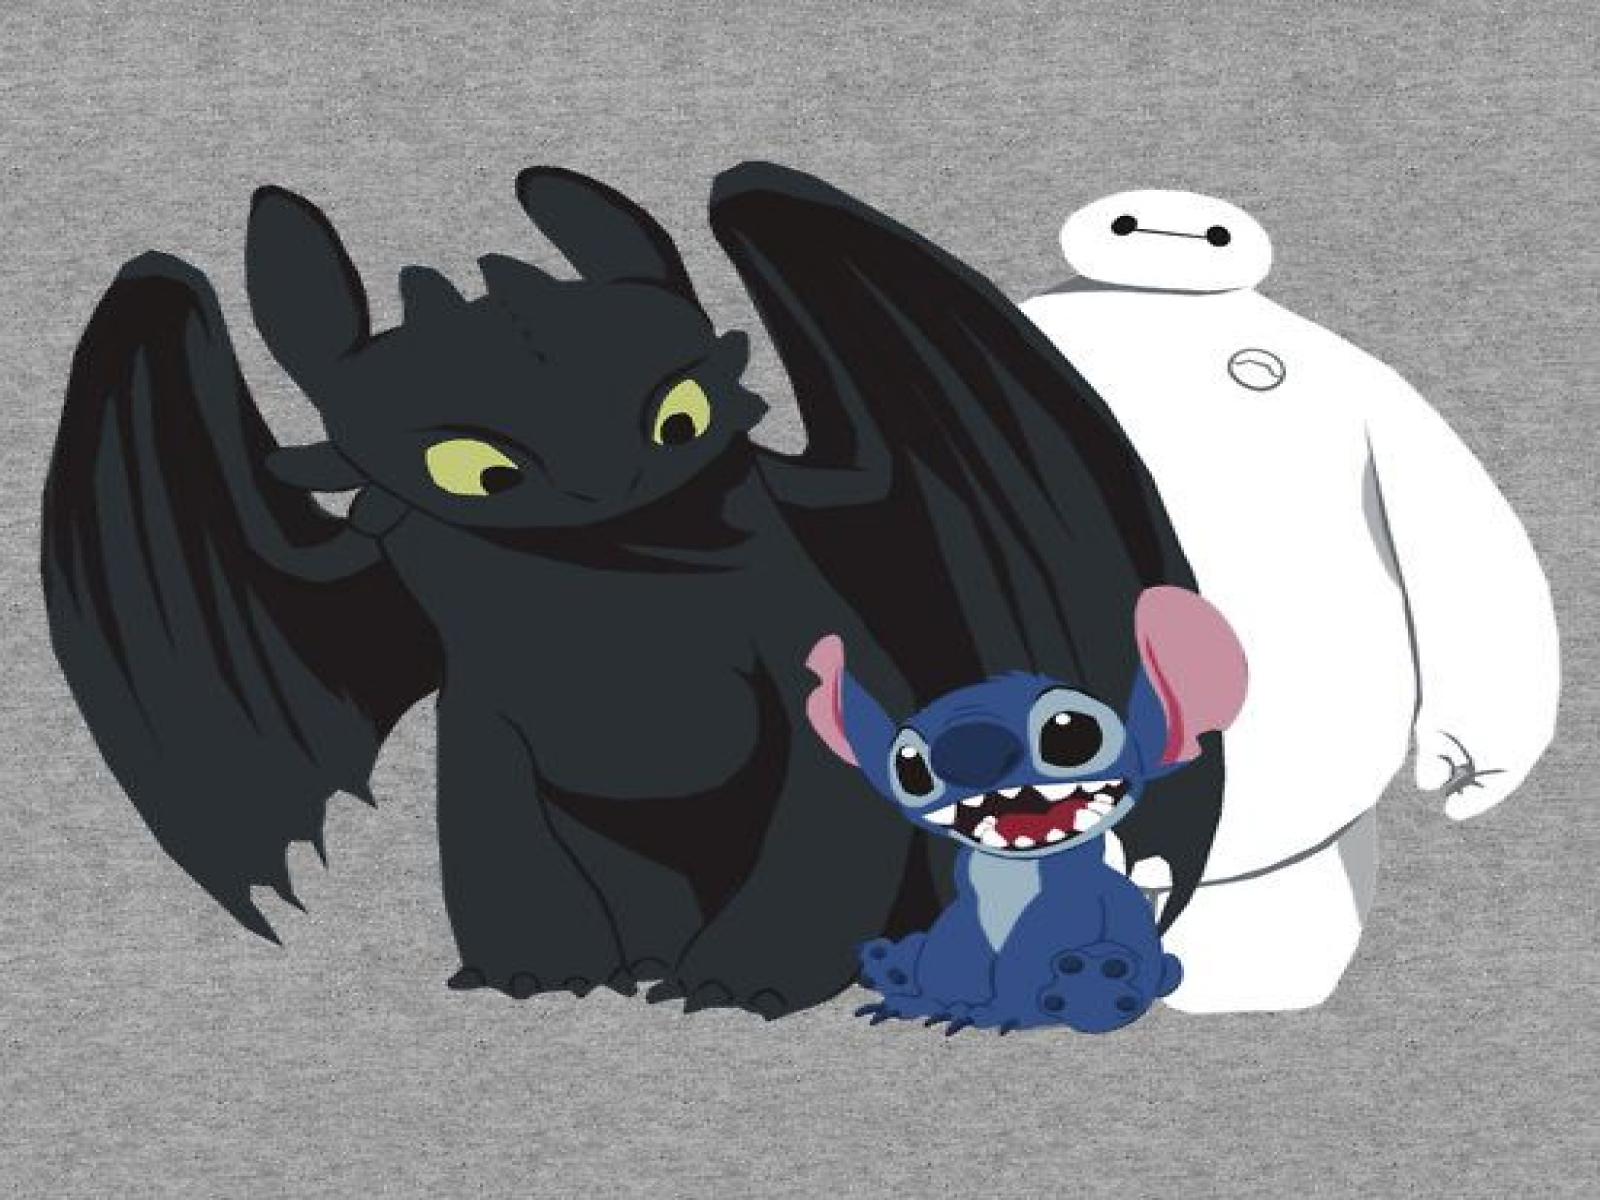 Stitch Batman Toothless Drawing How To Train Your Dragon  Toothless And  Stitch Batman Transparent PNG  2994x2200  Free Download on NicePNG